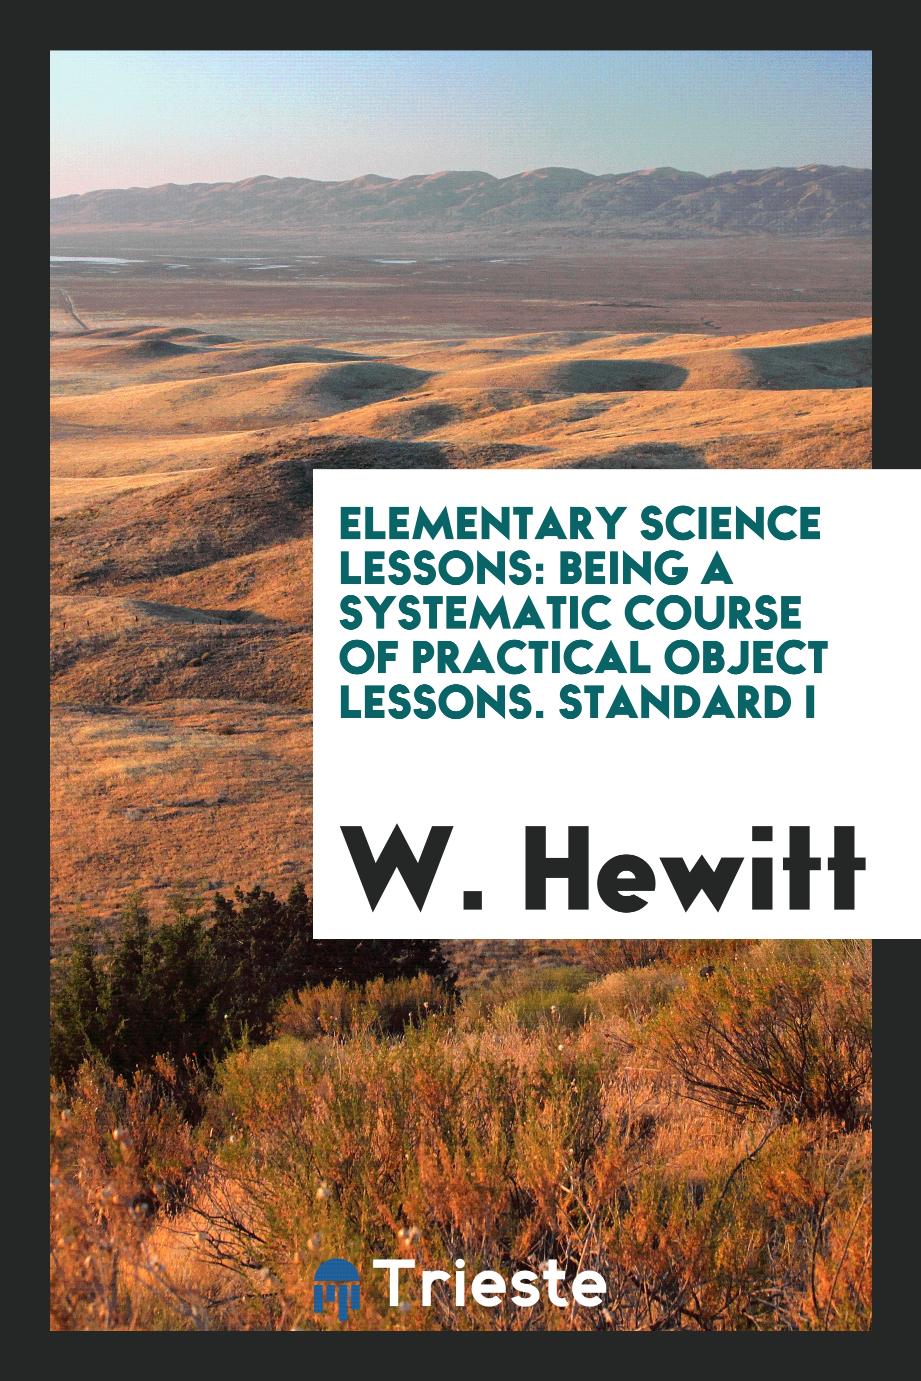 W. Hewitt - Elementary Science Lessons: Being a Systematic Course of Practical Object Lessons. Standard I